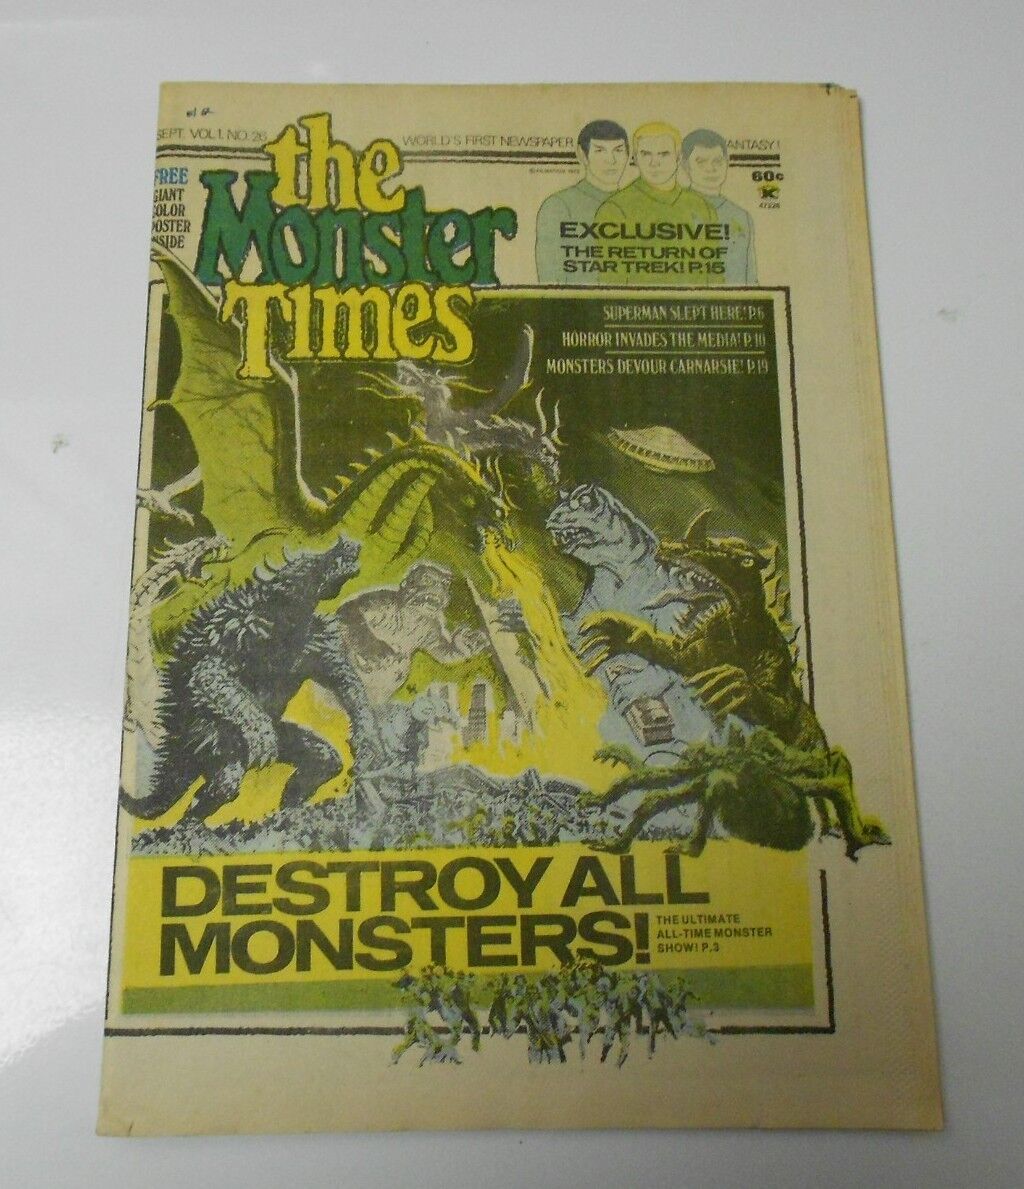 1973 MONSTER TIMES #26 Godzilla DESTROY ALL MONSTERS Poster VF+ Uncirculated